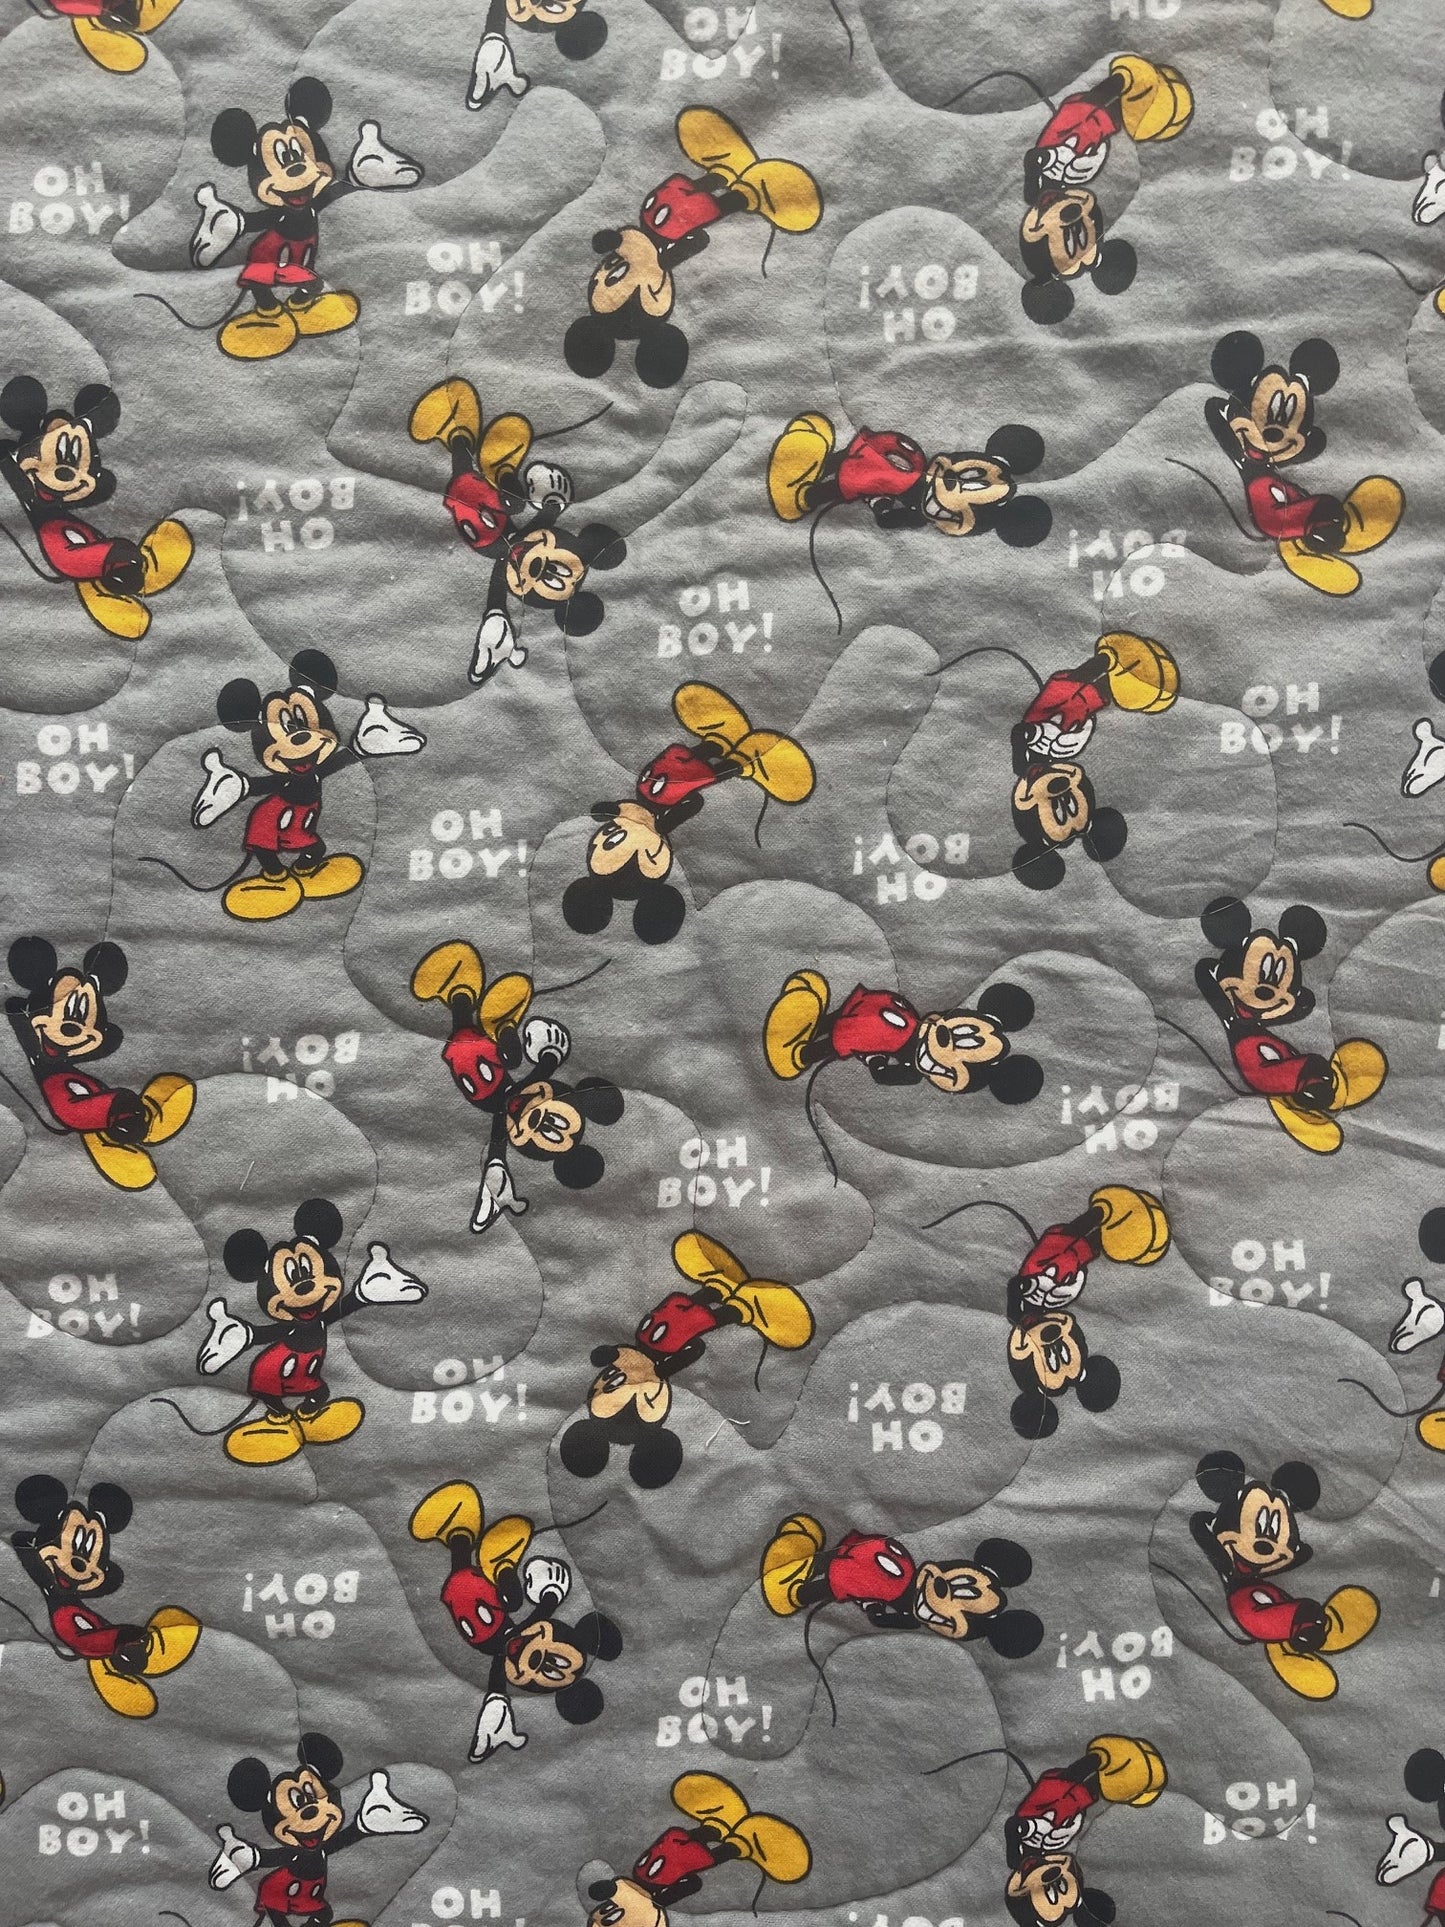 DISNEY CLASSIC MICKEY MOUSE 36"X44" QUILTED BLANKET with Soft Flannel backing